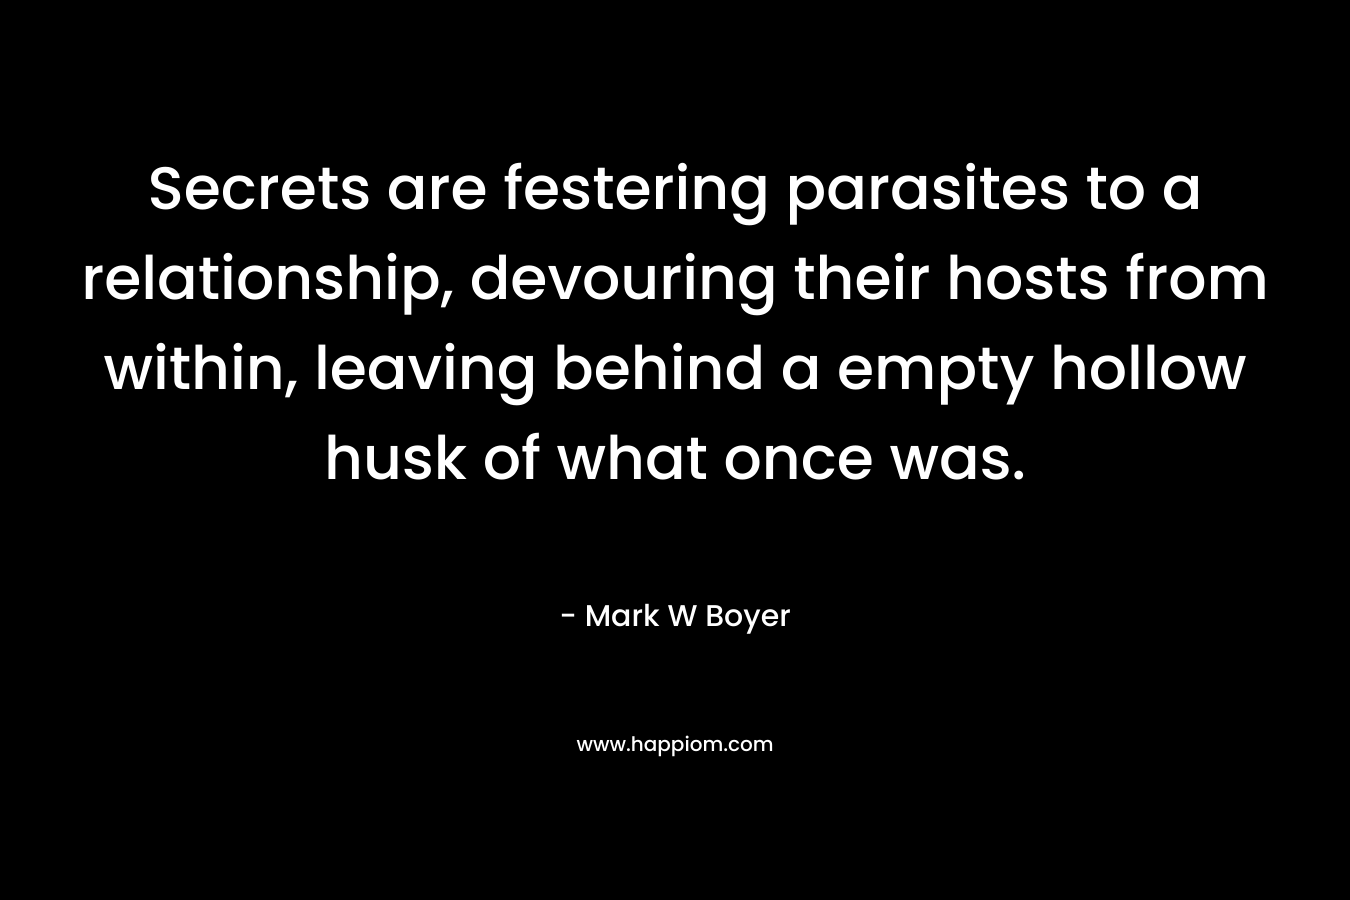 Secrets are festering parasites to a relationship, devouring their hosts from within, leaving behind a empty hollow husk of what once was.